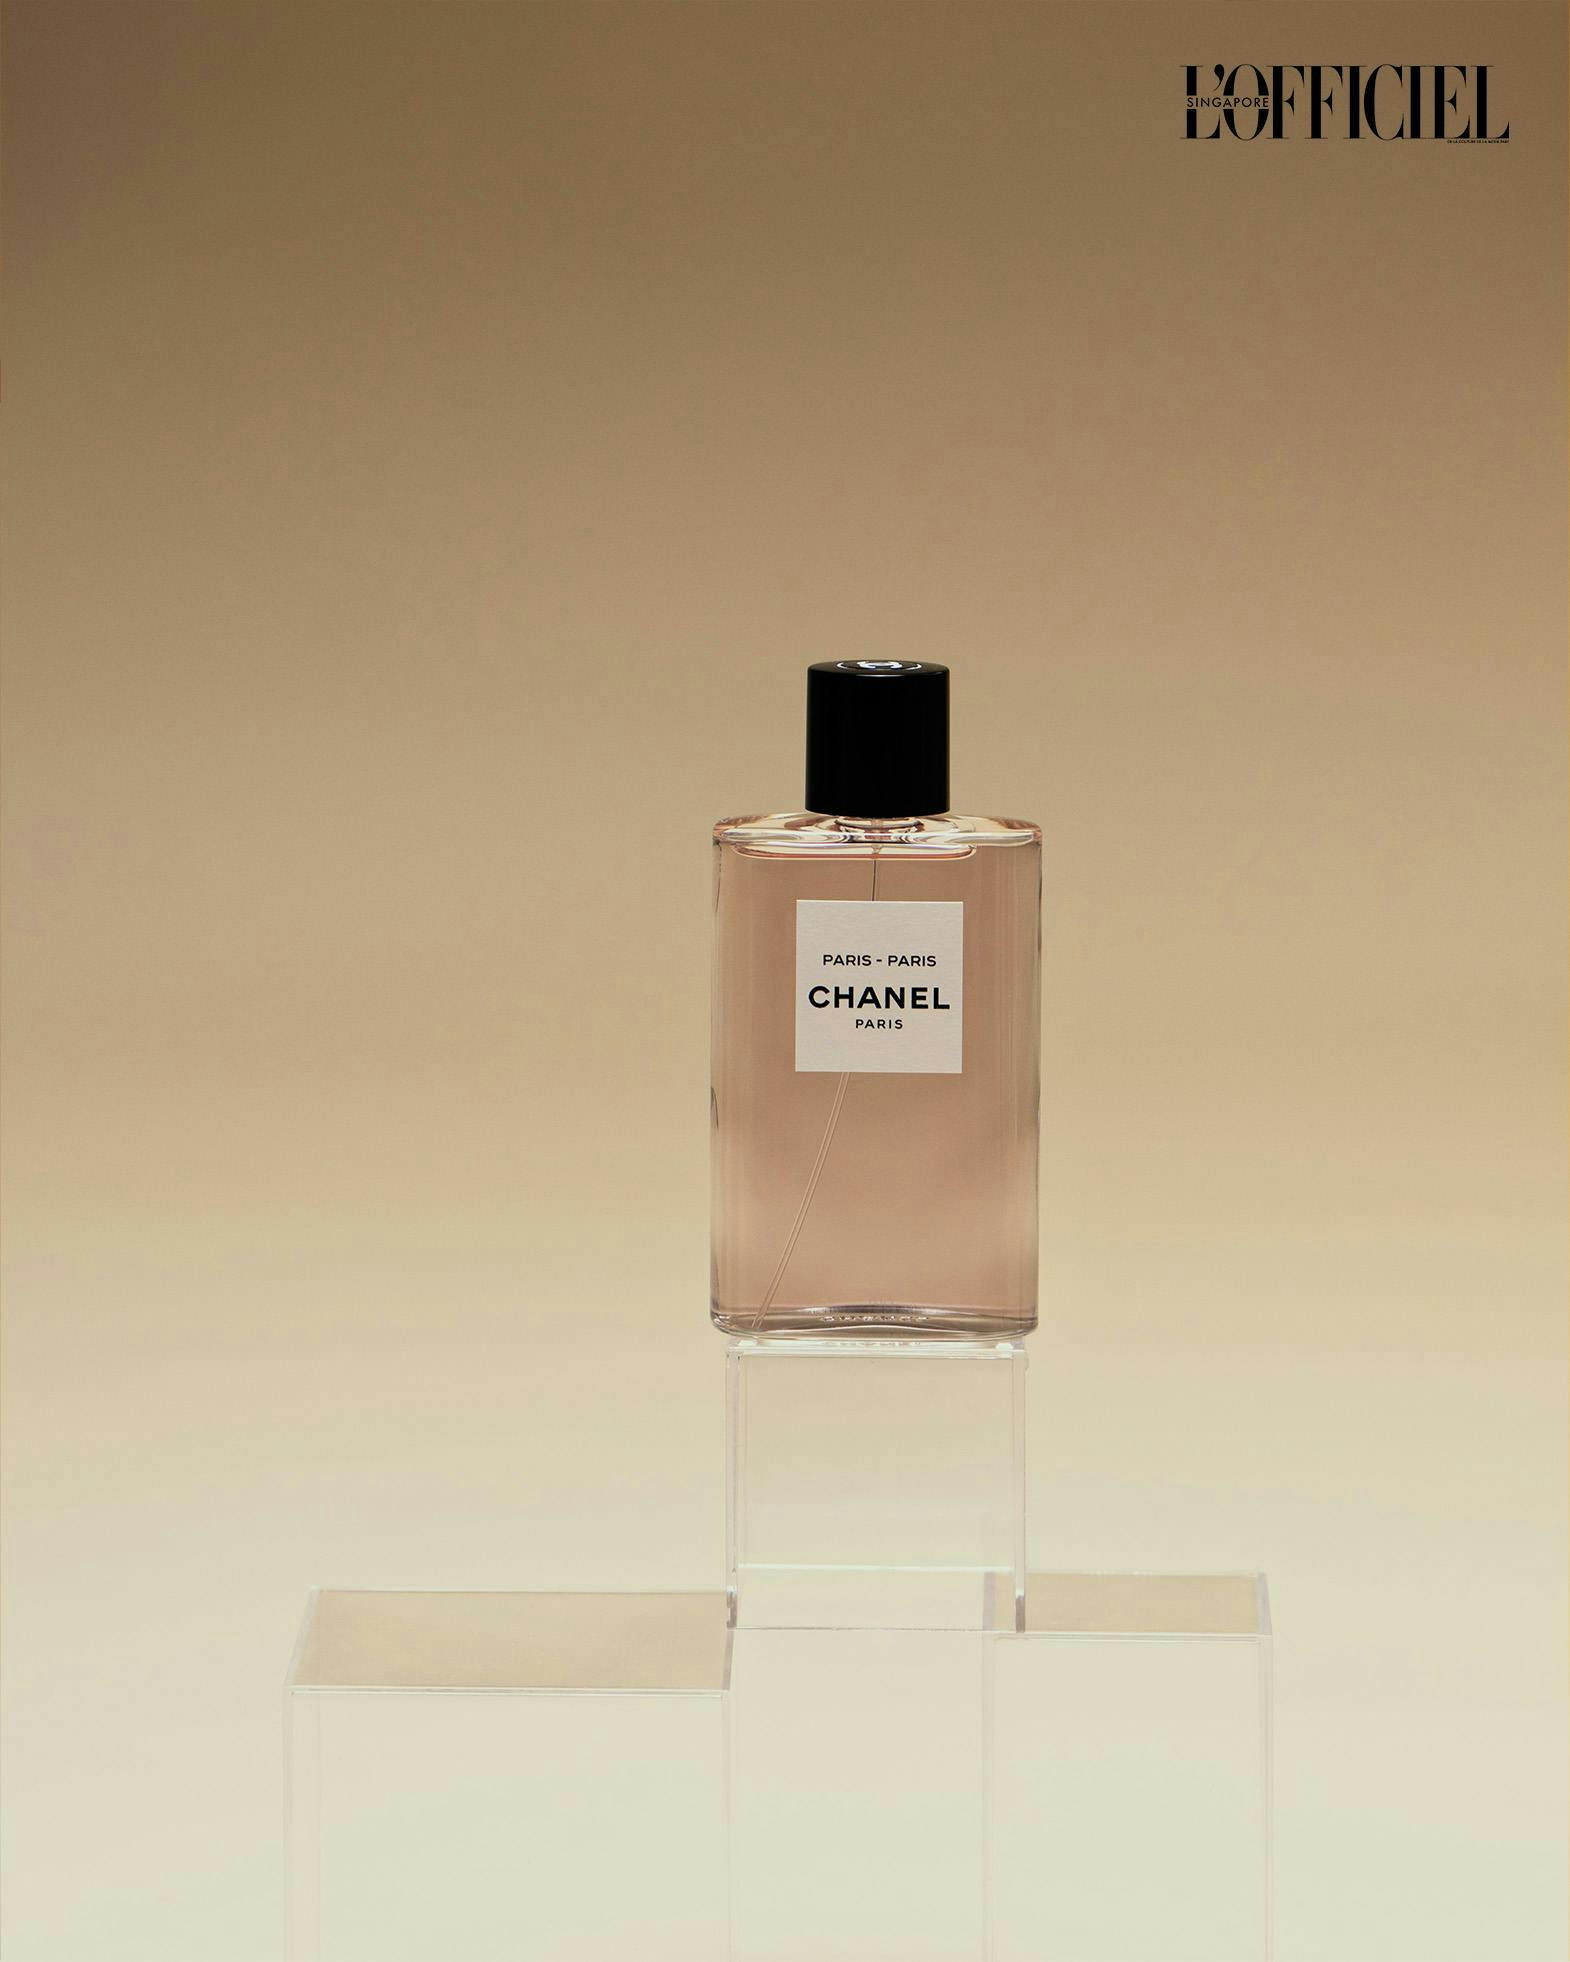  CHANEL LES EAUX DE CHANEL PARIS-PARIS, $220 FOR 125ML. Inspired by destinations that have a strong connection to Chanel, the floral-scented LES EAUX DE CHANEL PARIS-PARIS houses the same olfactory of classic Chanel fragrances to bring wearers on a journey of freshness and lightness.